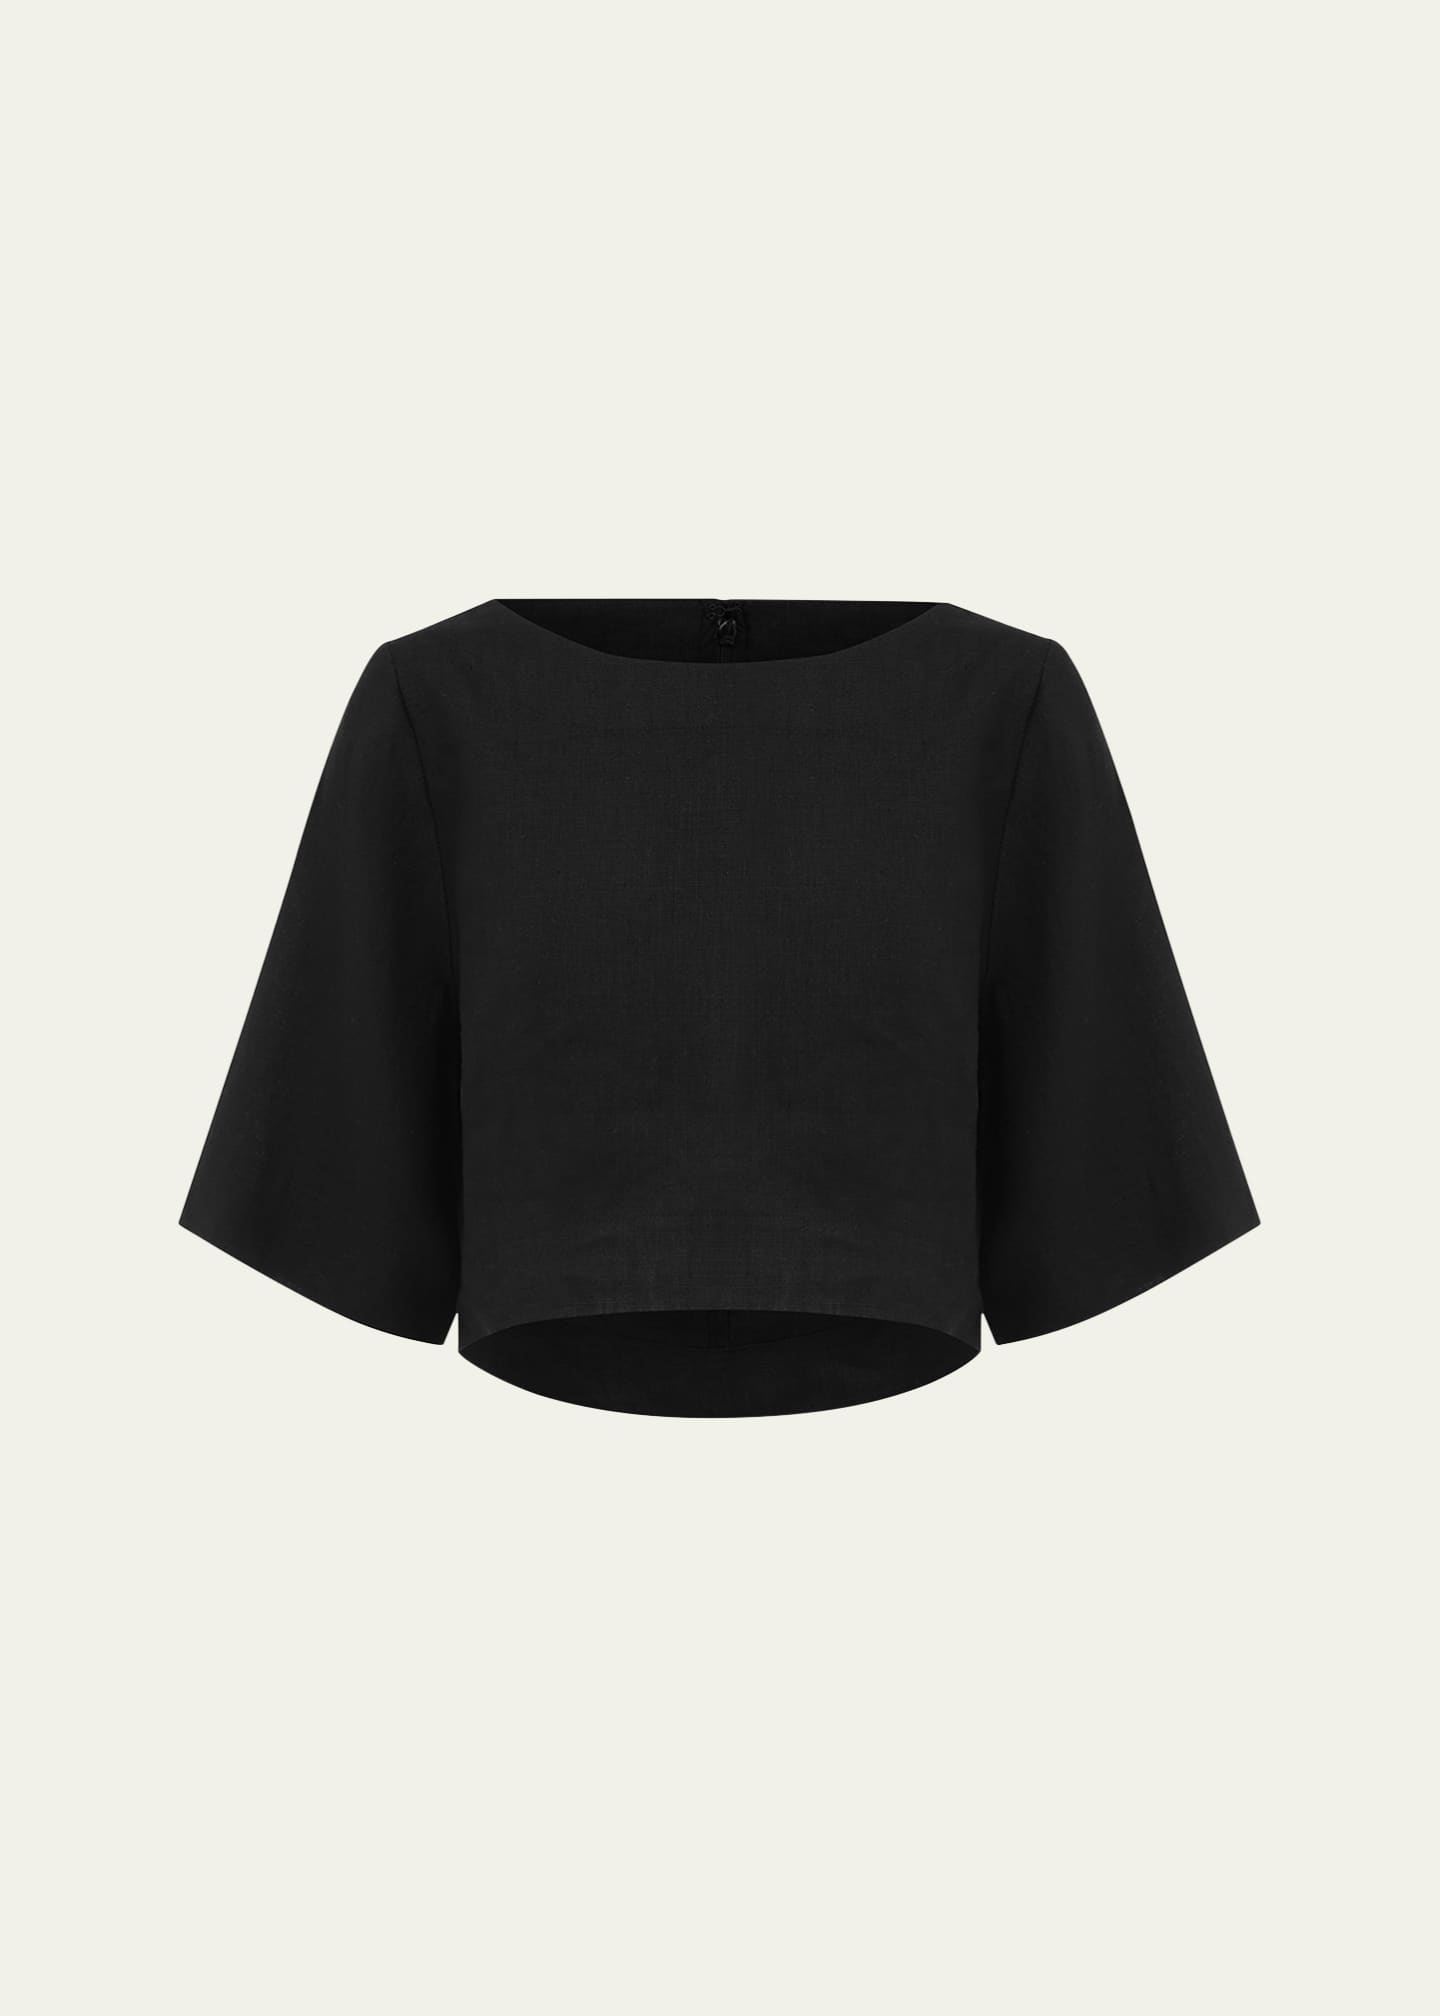 Linen Crop Top for Women, Boat Neck and Short Sleeve